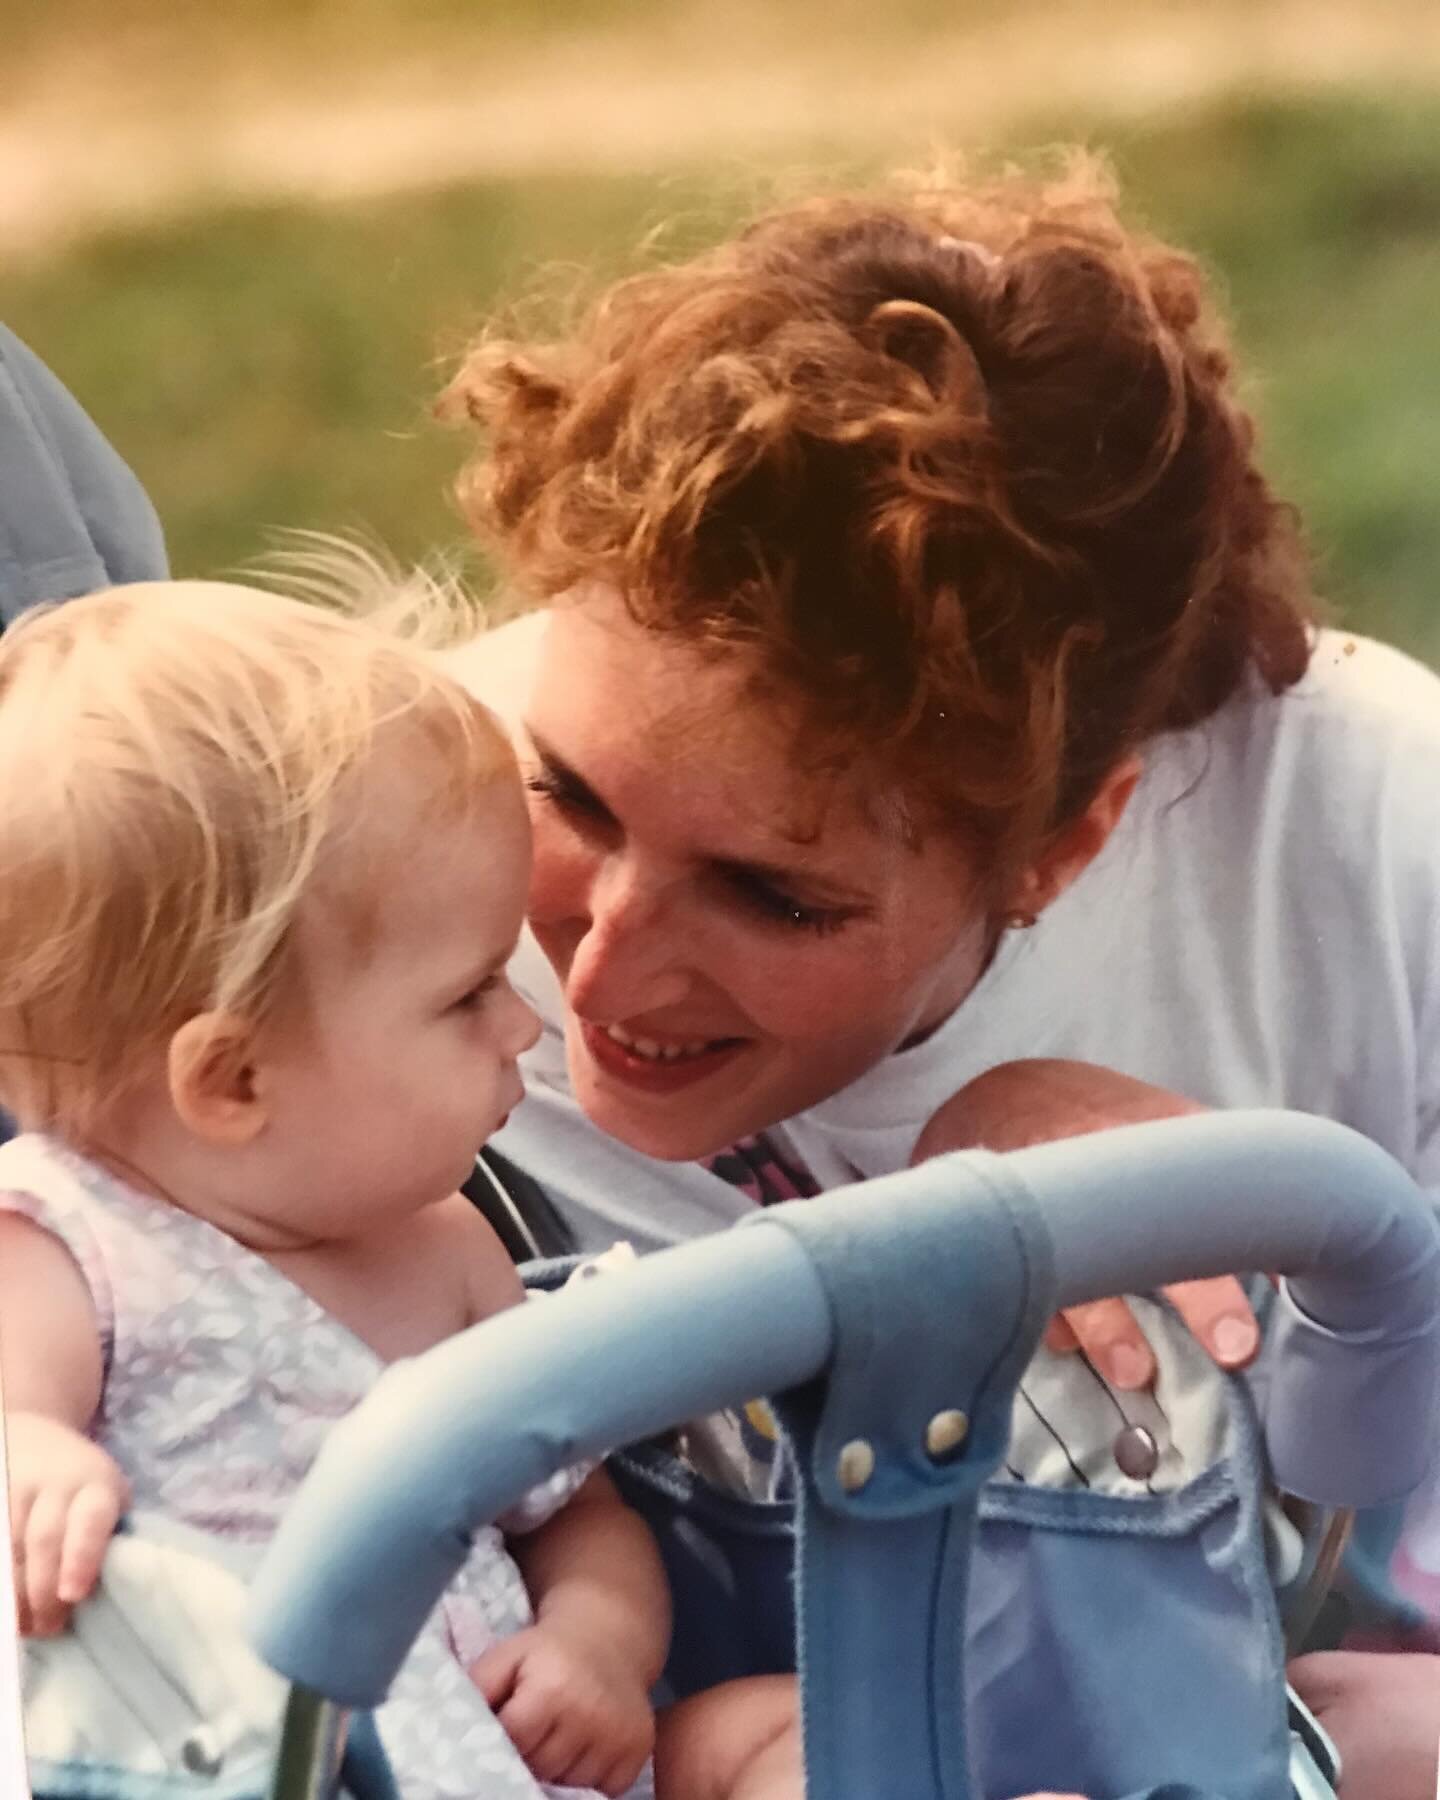 It&rsquo;s been four years without my mama today. I don&rsquo;t feel the loss deeply as often after these years, but it&rsquo;s still there. I doubt the sorrow of losing loved ones ever really goes away. But it was a good day. I watched my sister loo